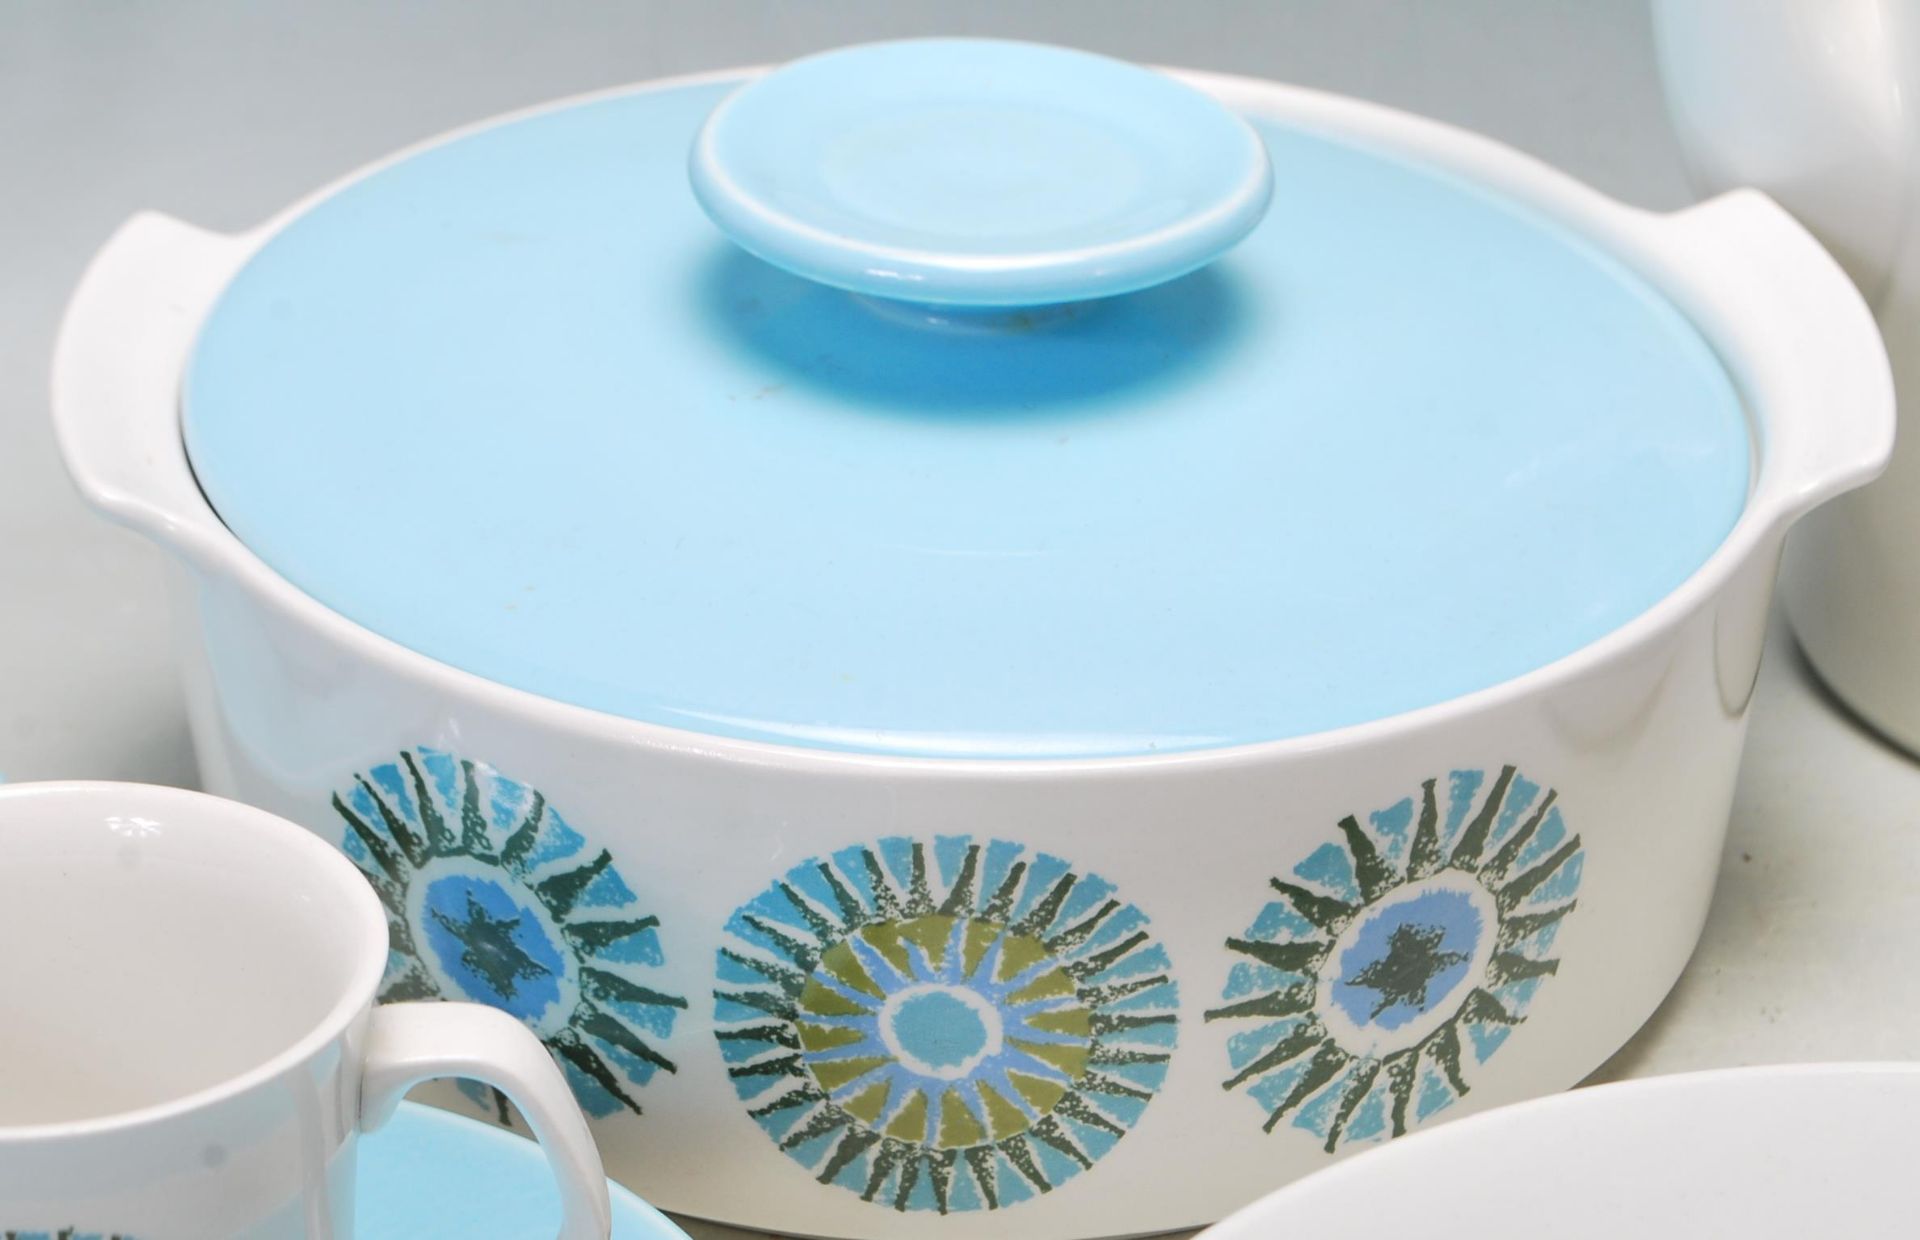 RETRO VINTAGE LATE 20TH CENTURY DINNER SERVICE BY MIDWINTER AND JG MEAKIN STUDIO. - Image 10 of 14